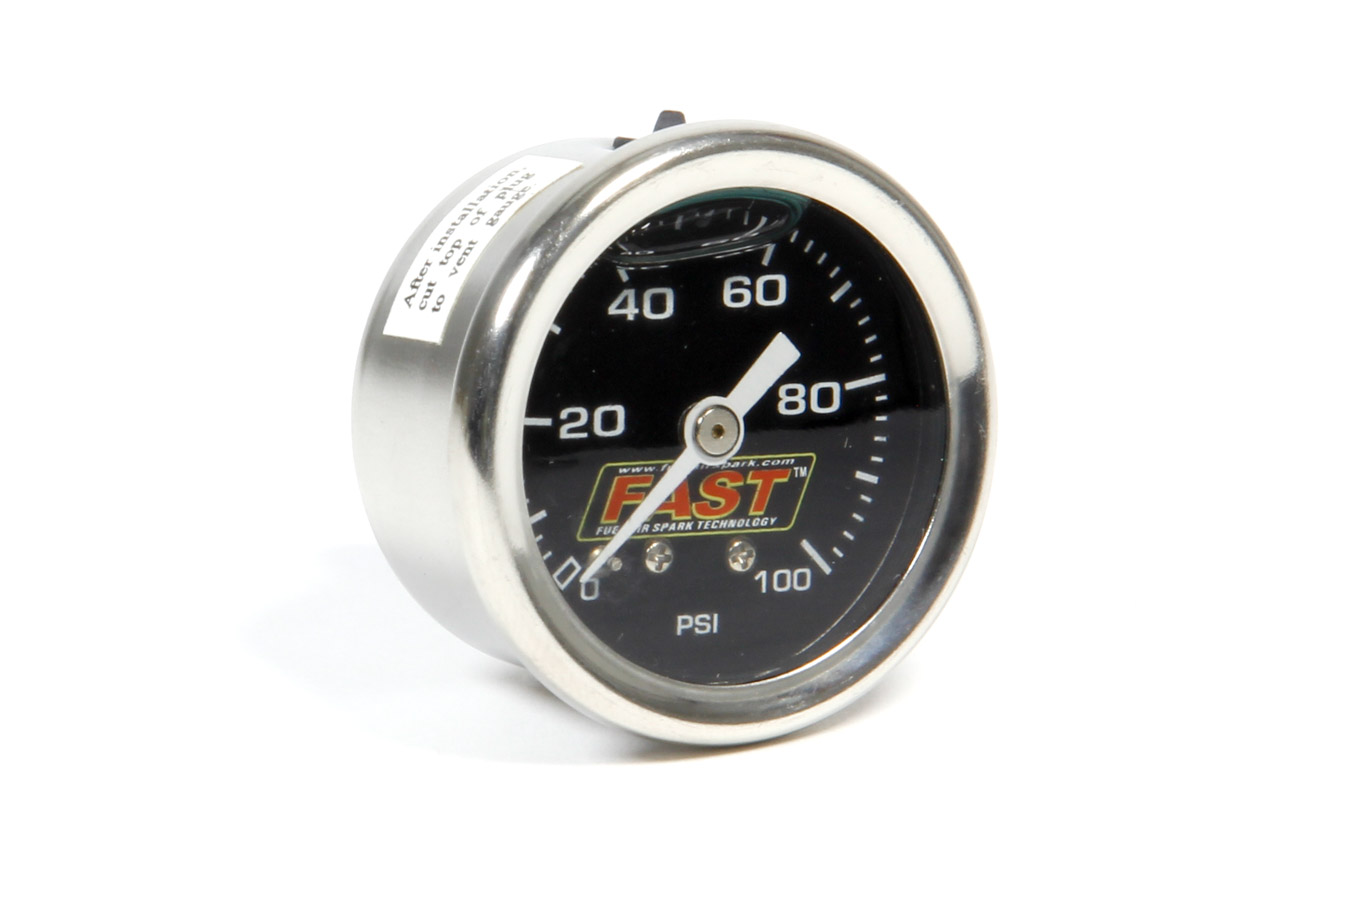 Oil Temp Gauge 2-5//8in  QUICKCAR RACING PRODUCTS 611-6009